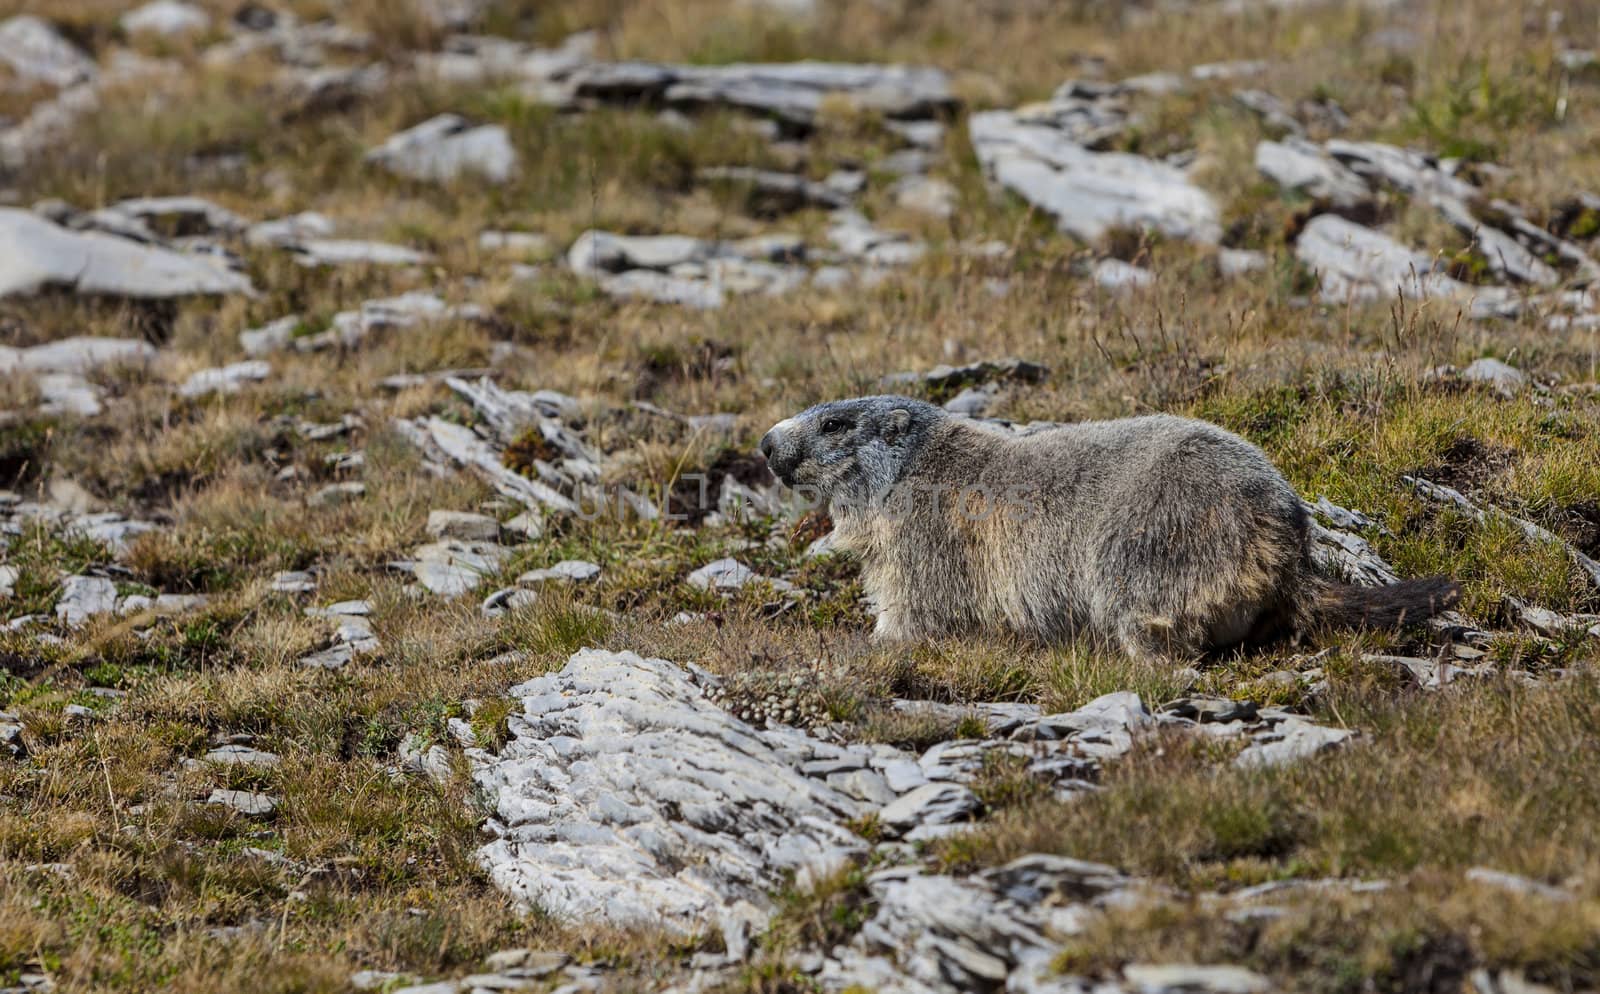 Alpine Marmot (Marmota marmota) well in the natural environment in the South French Alps.